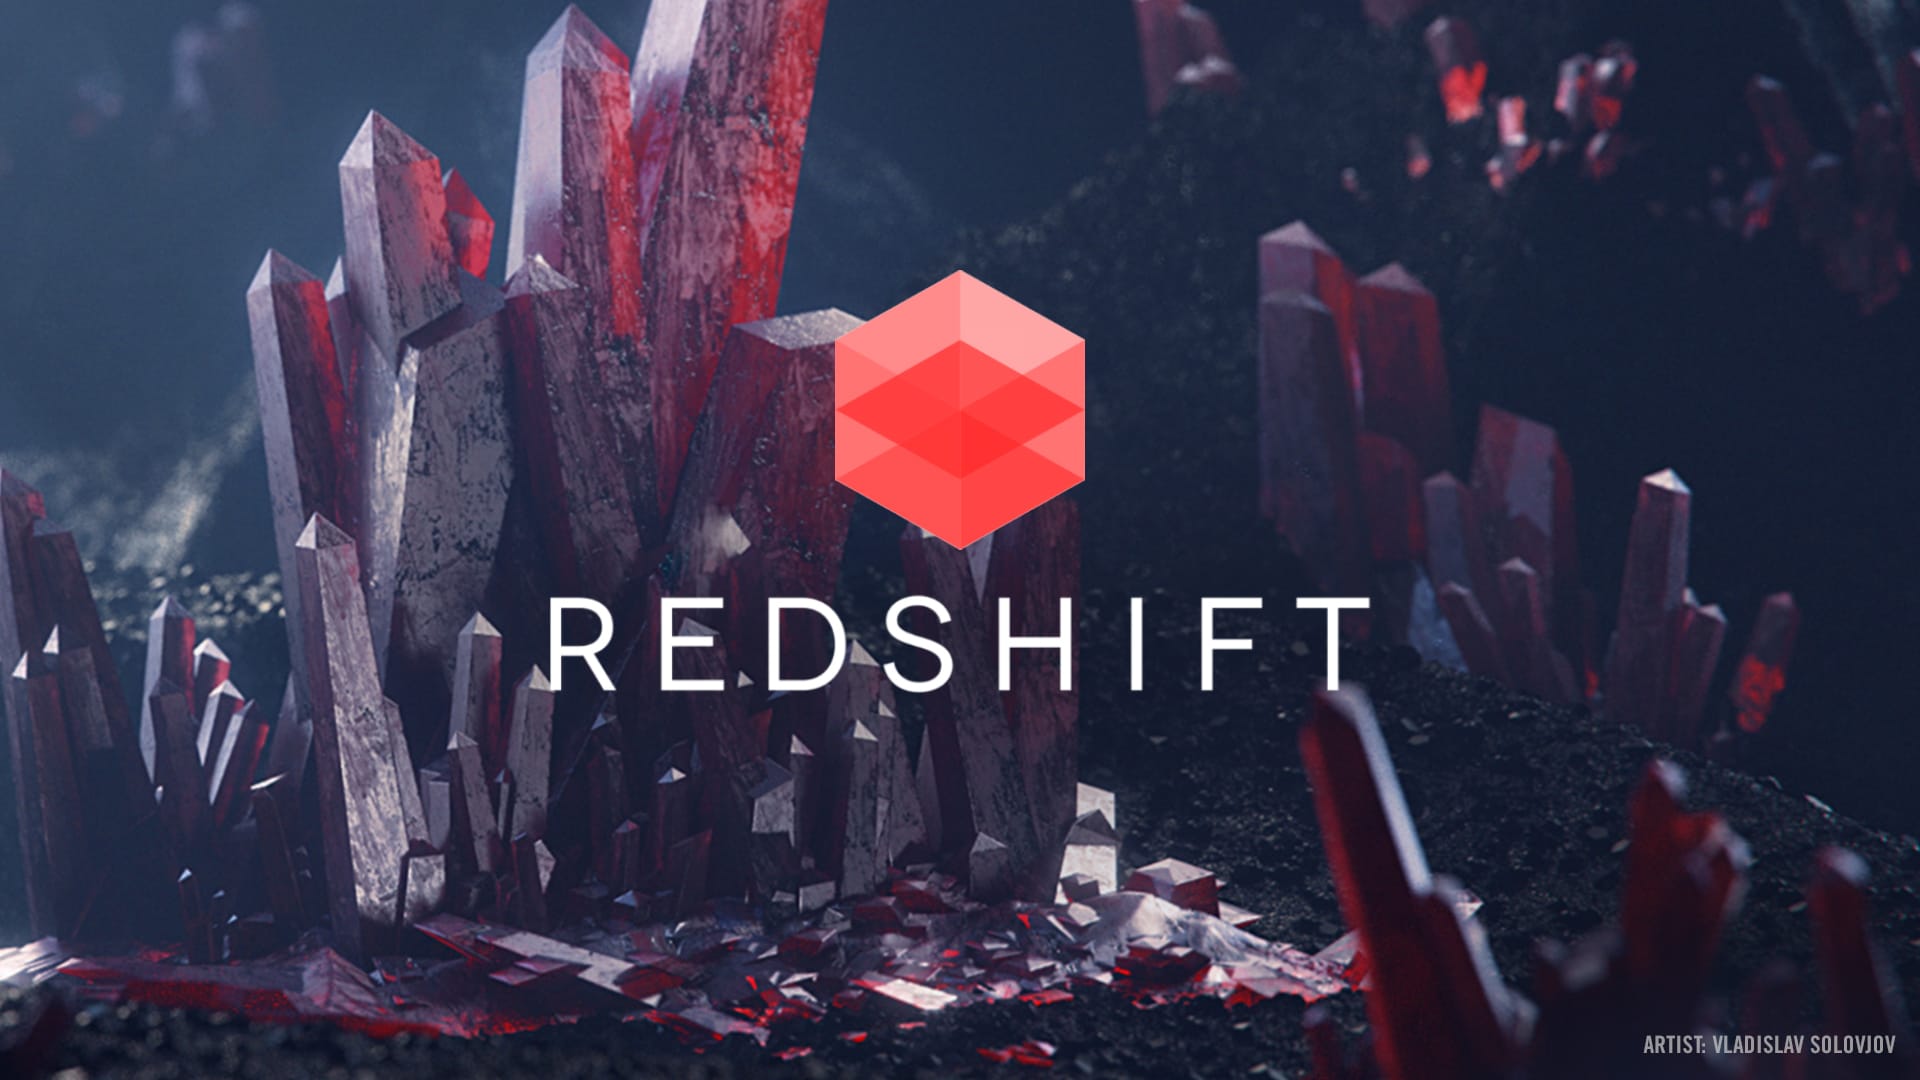 Redshift rendering. Редшифт рендер. Redshift logo. Maxon Redshift logo. Визуализации Redshift.